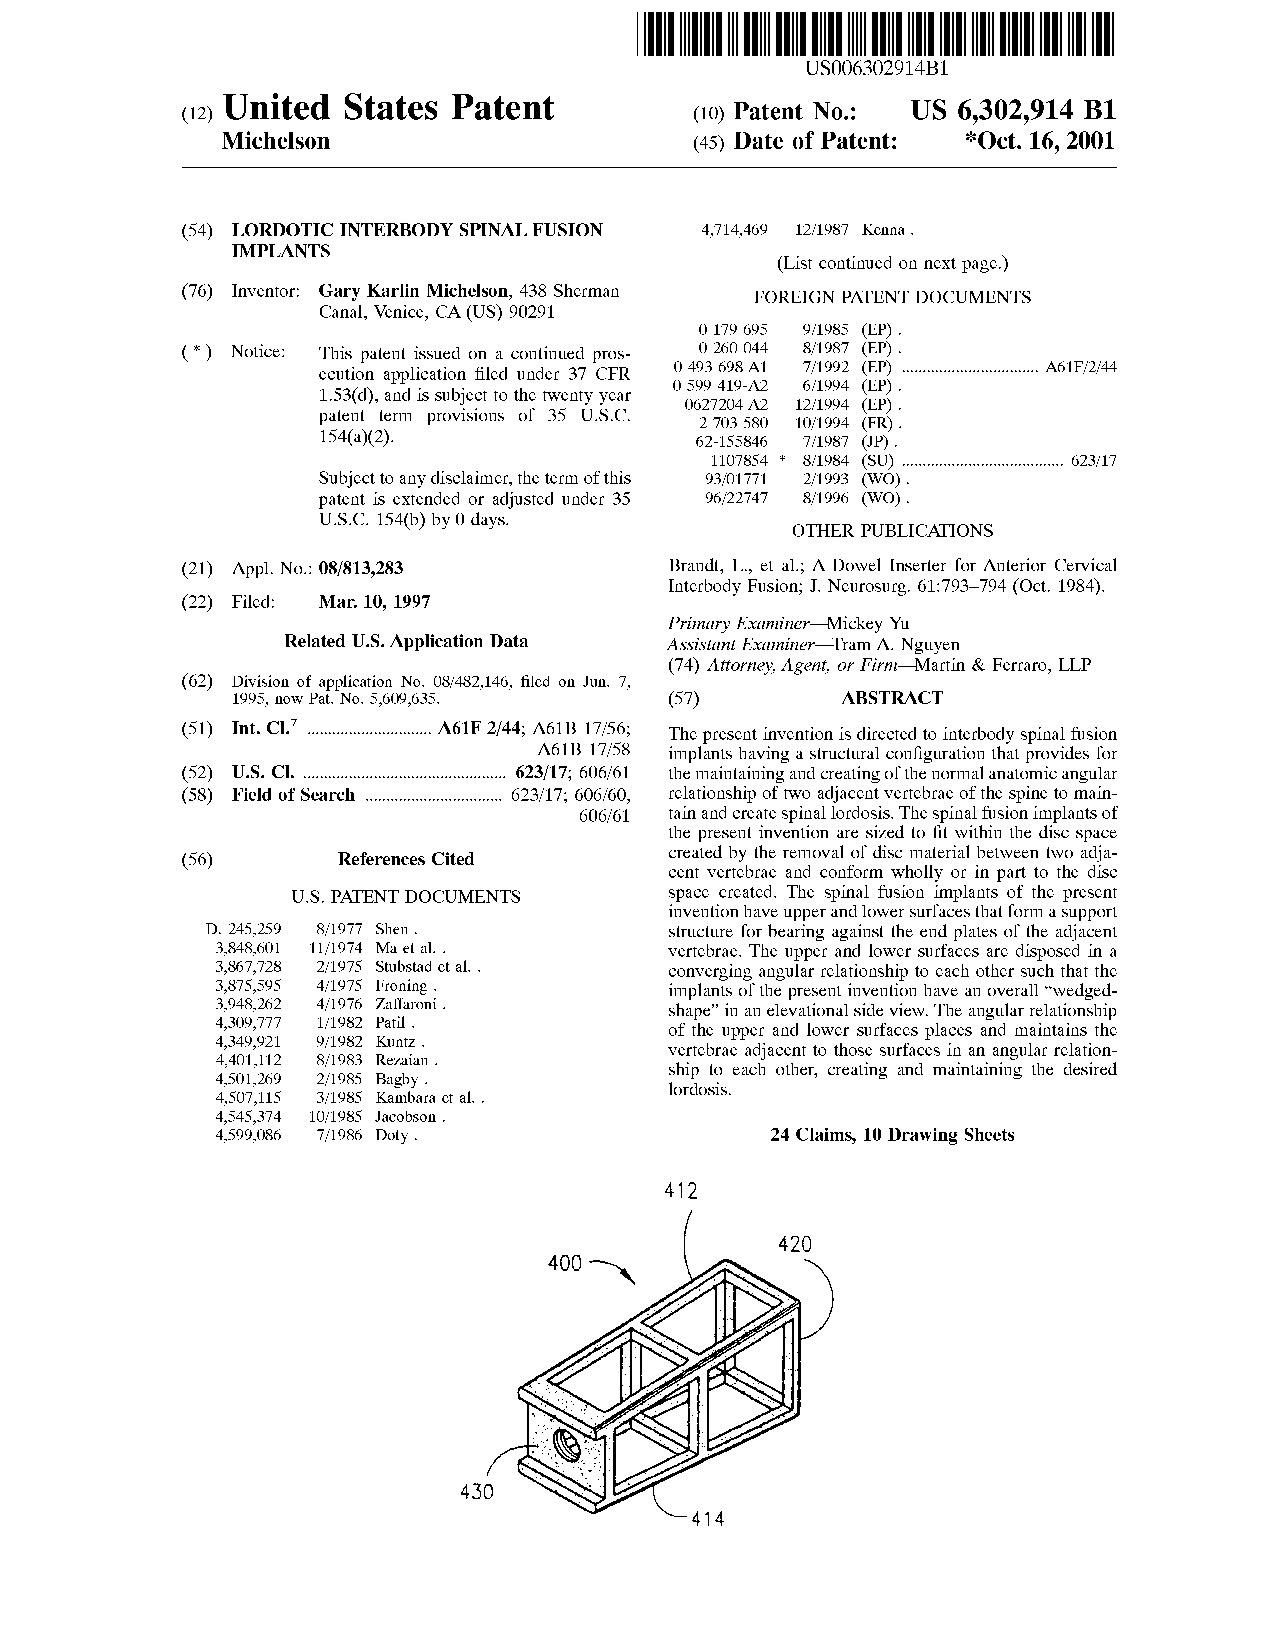 Lordotic interbody spinal fusion implants - Patent 6,302,914